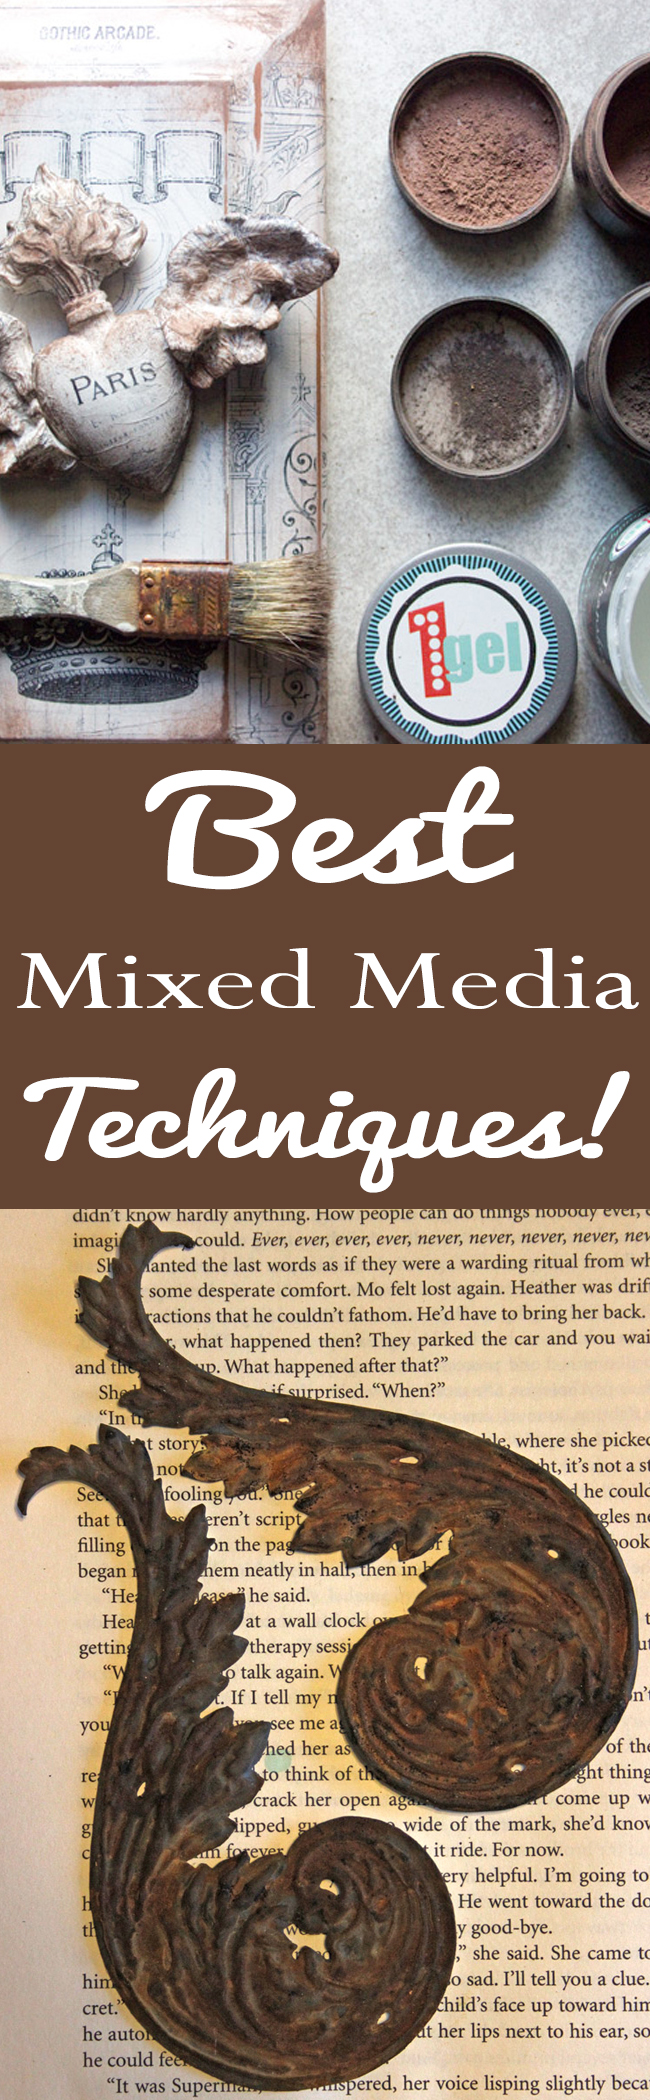 10 Best Mixed Media Techniques! - The Graphics Fairy